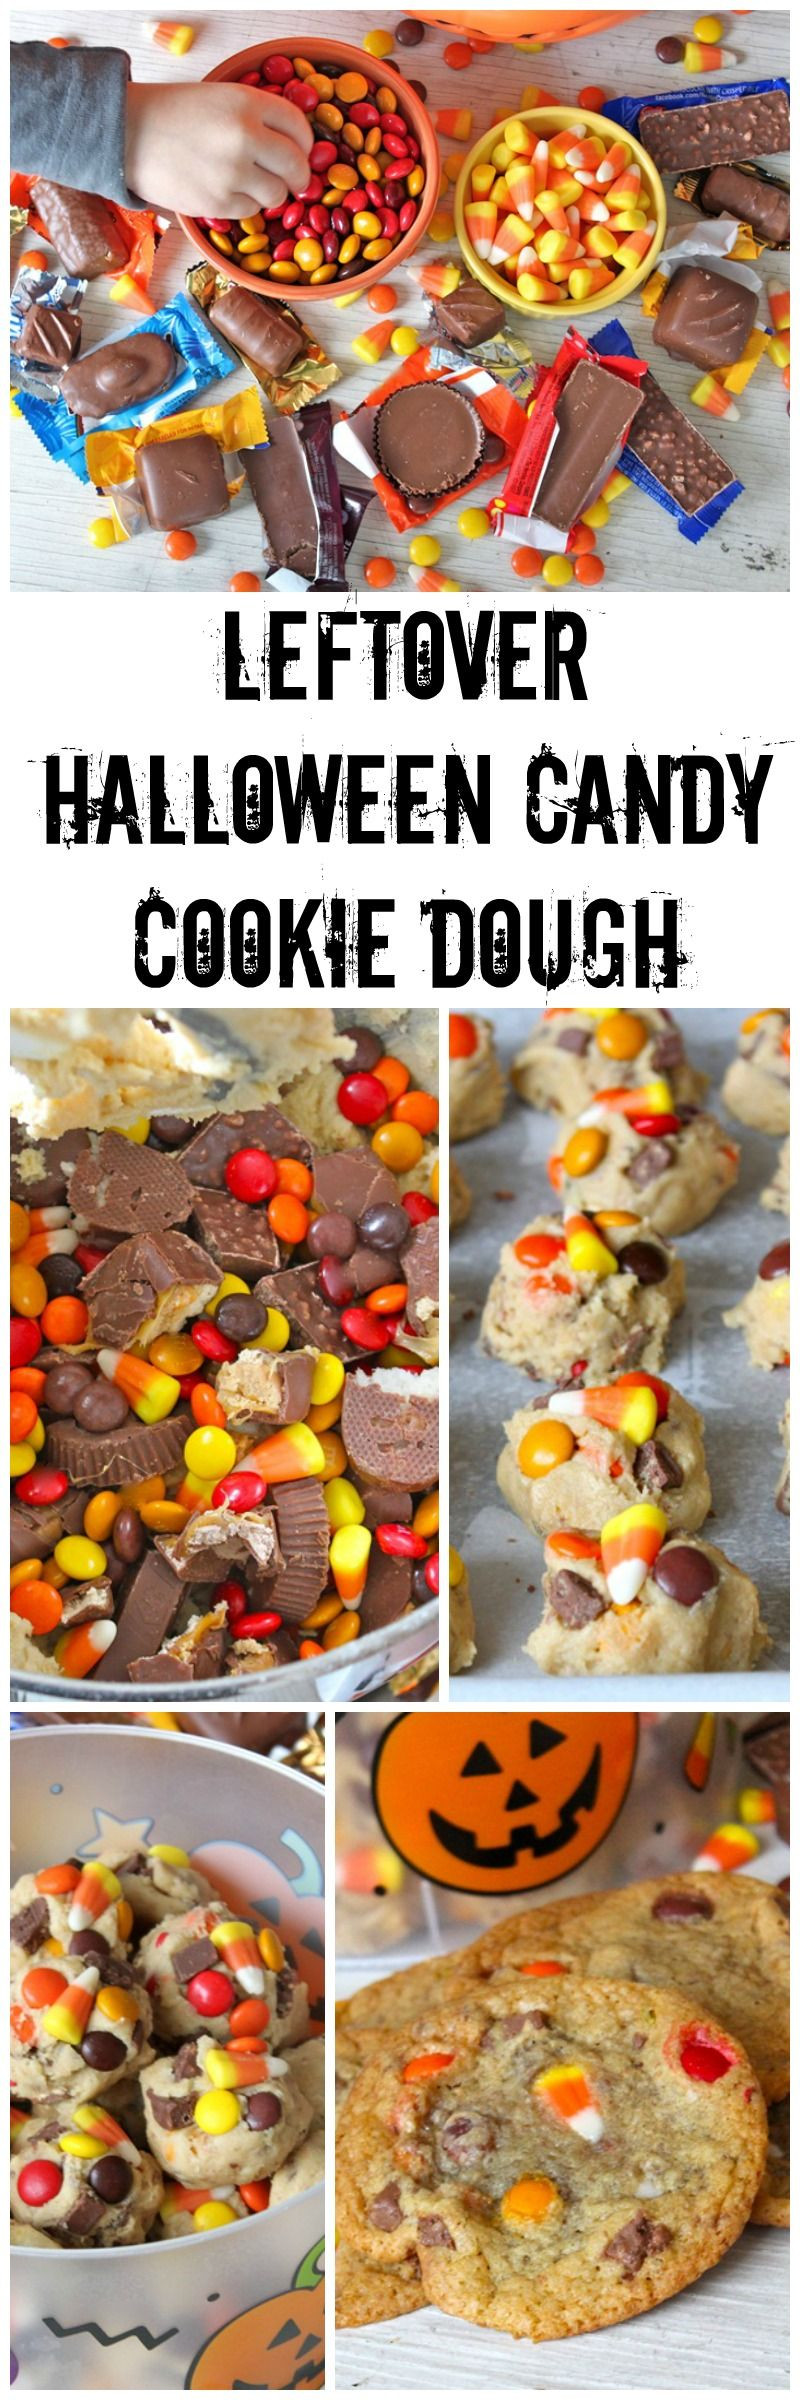 Leftover Halloween Candy Cookies
 Leftover Halloween Candy Cookie Dough mix your leftover